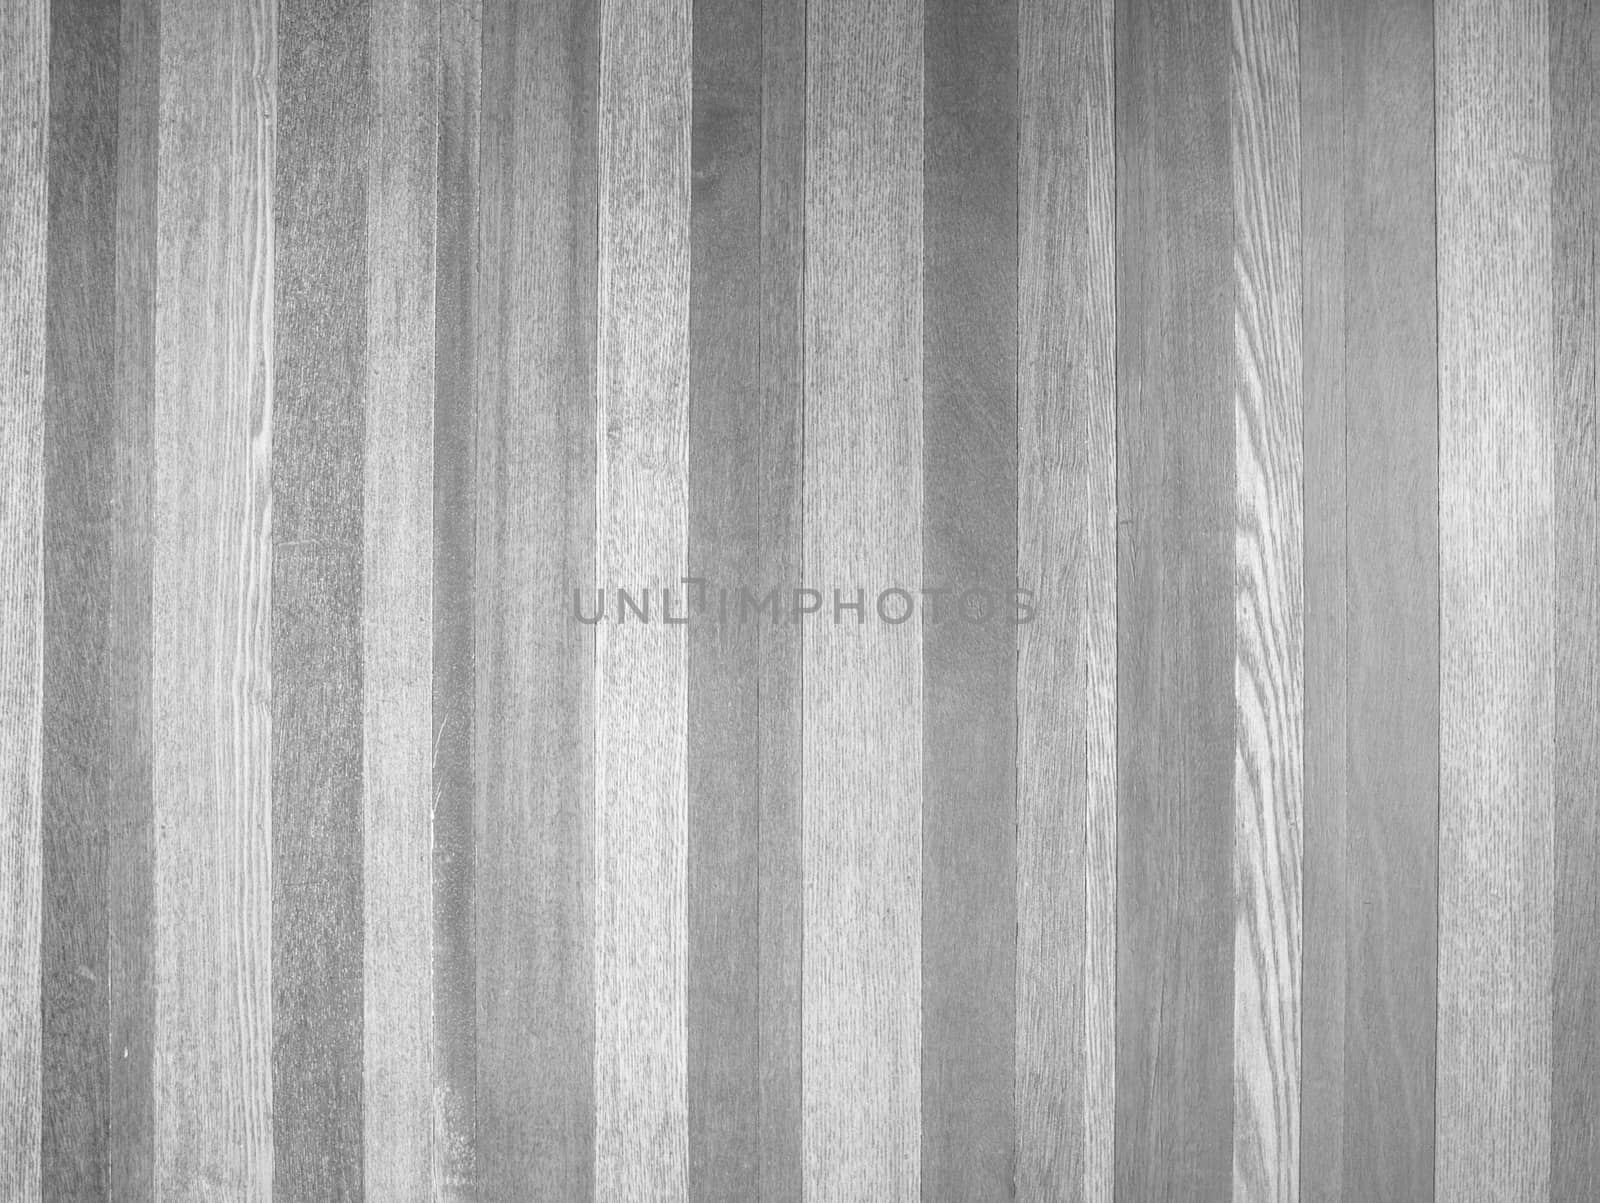 White background texture of wood by Suriyaphoto